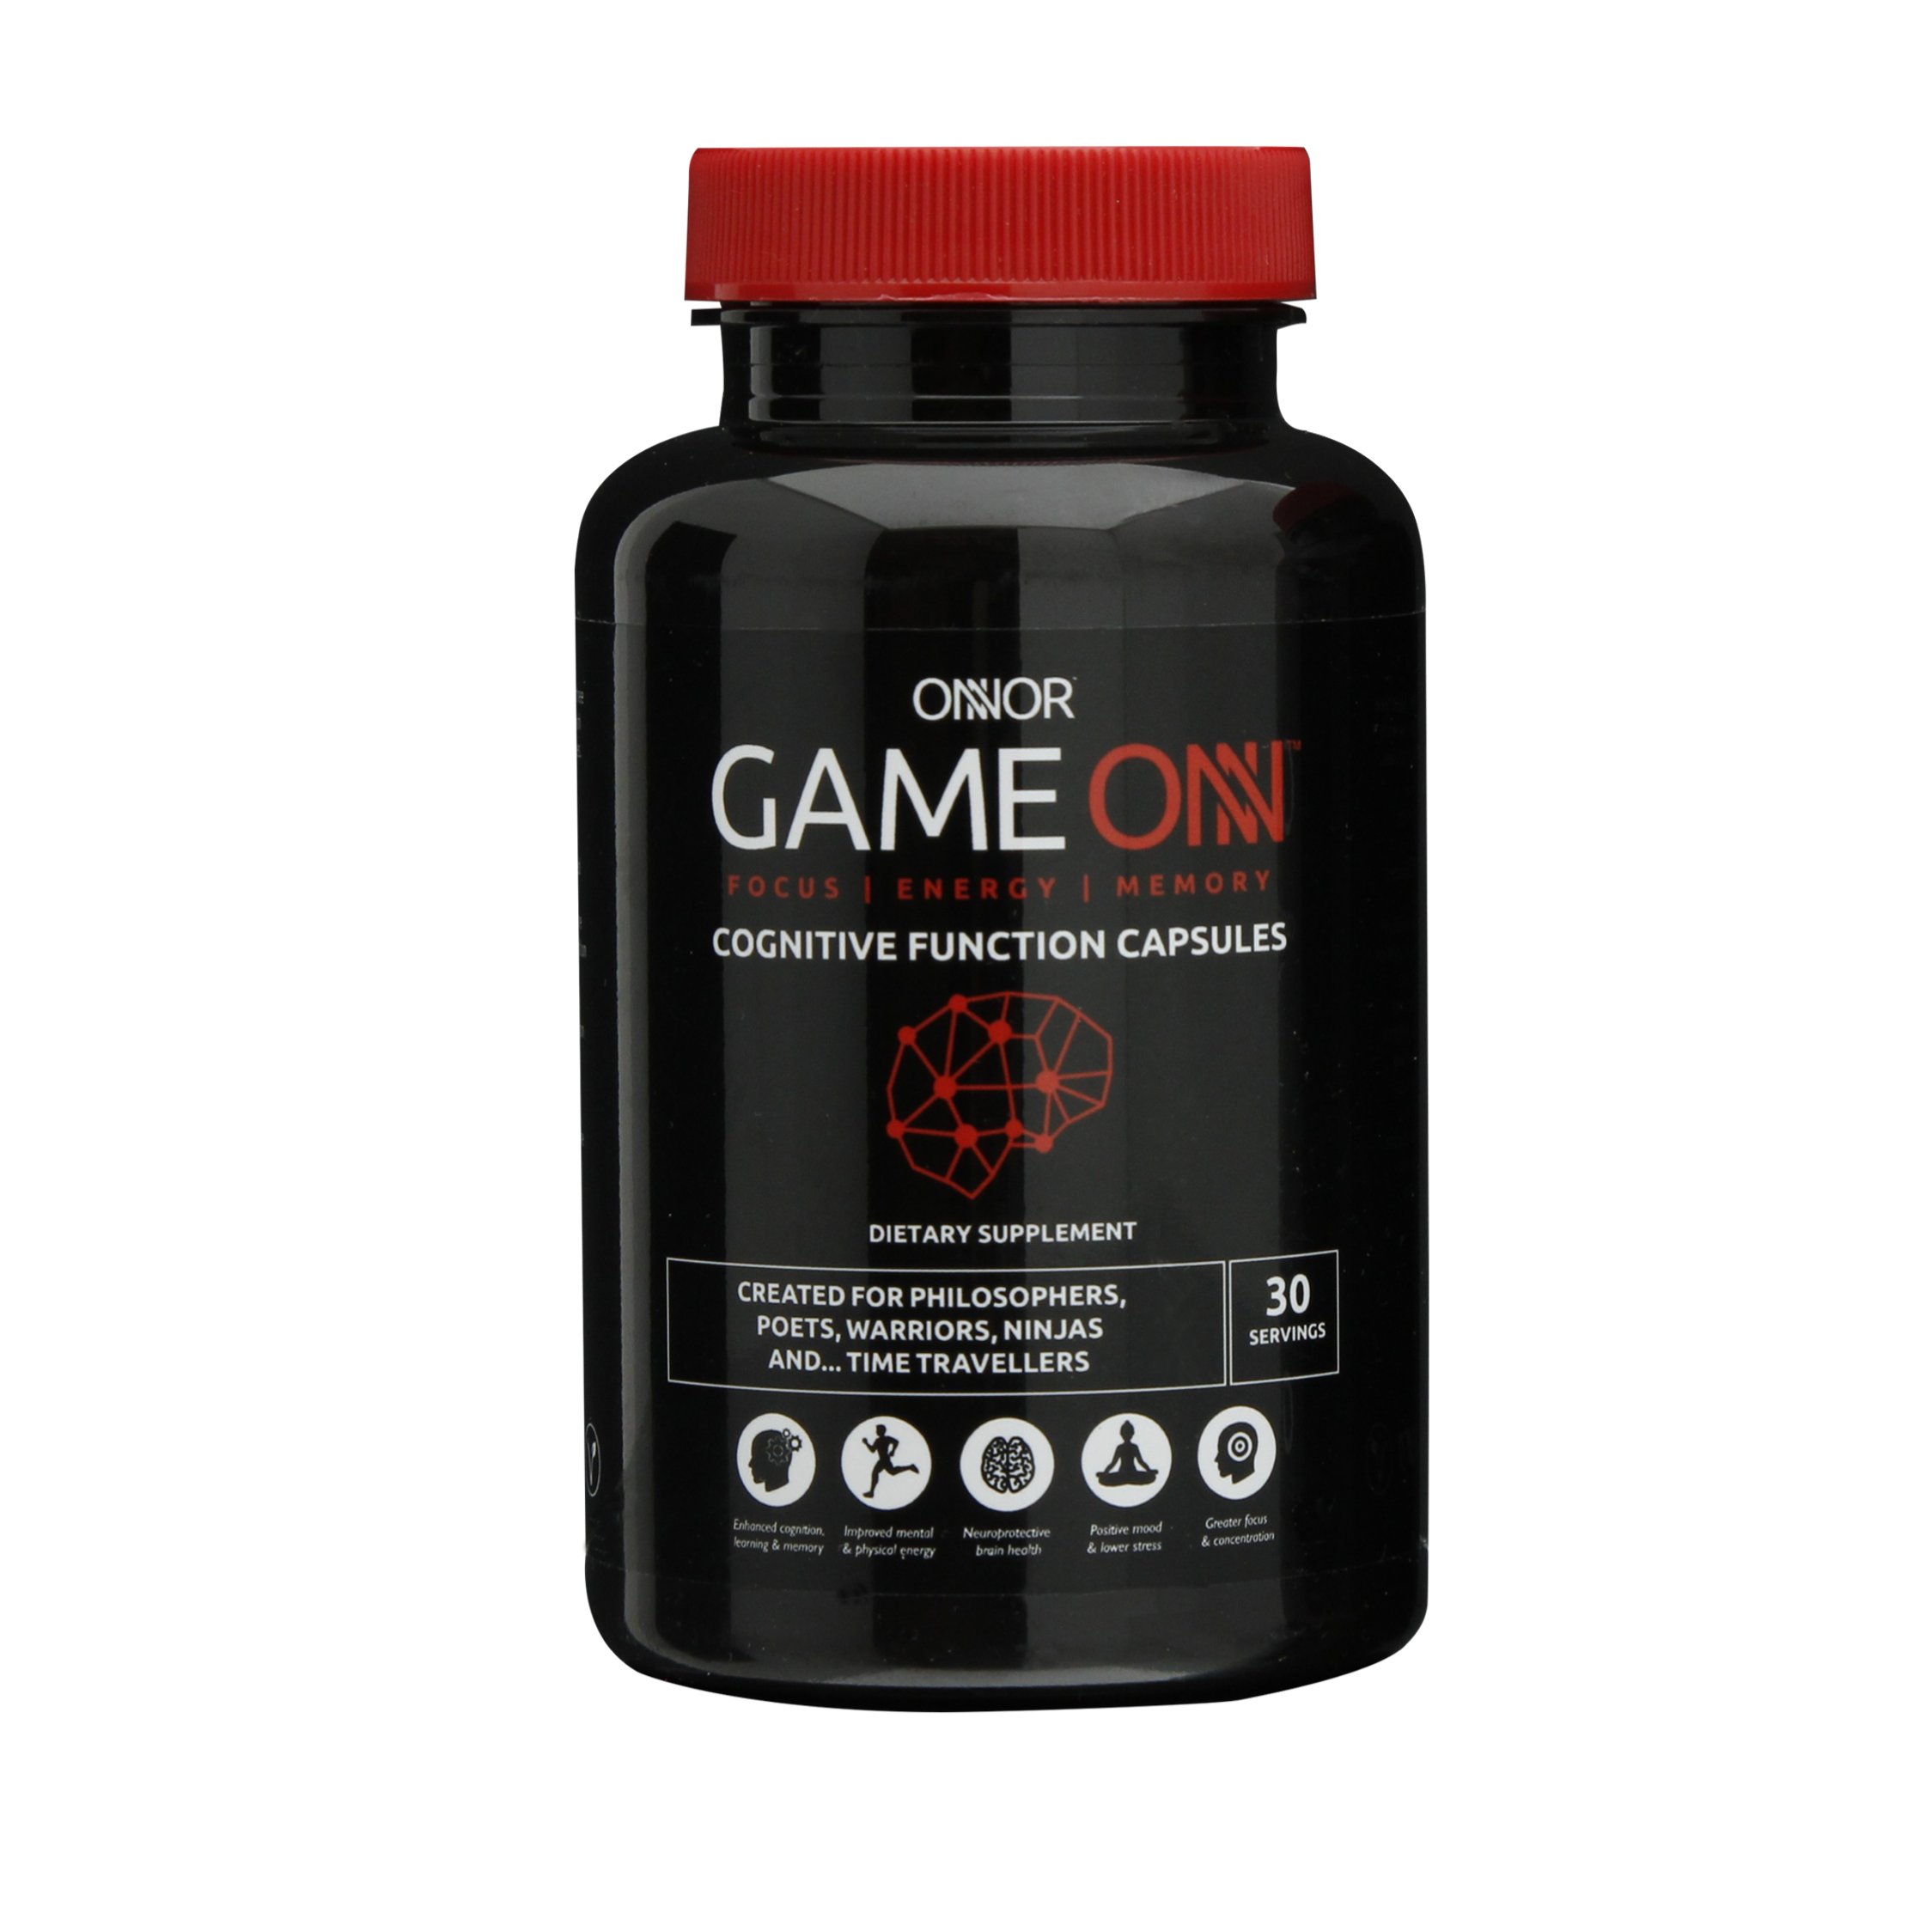 Cognitive Function Capsules – Game ONN Nootropic Capsules – ONNOR BLACK Single Pack – 150mg Caffeine Per Serving – For Focus & Energy – ONNOR Limited